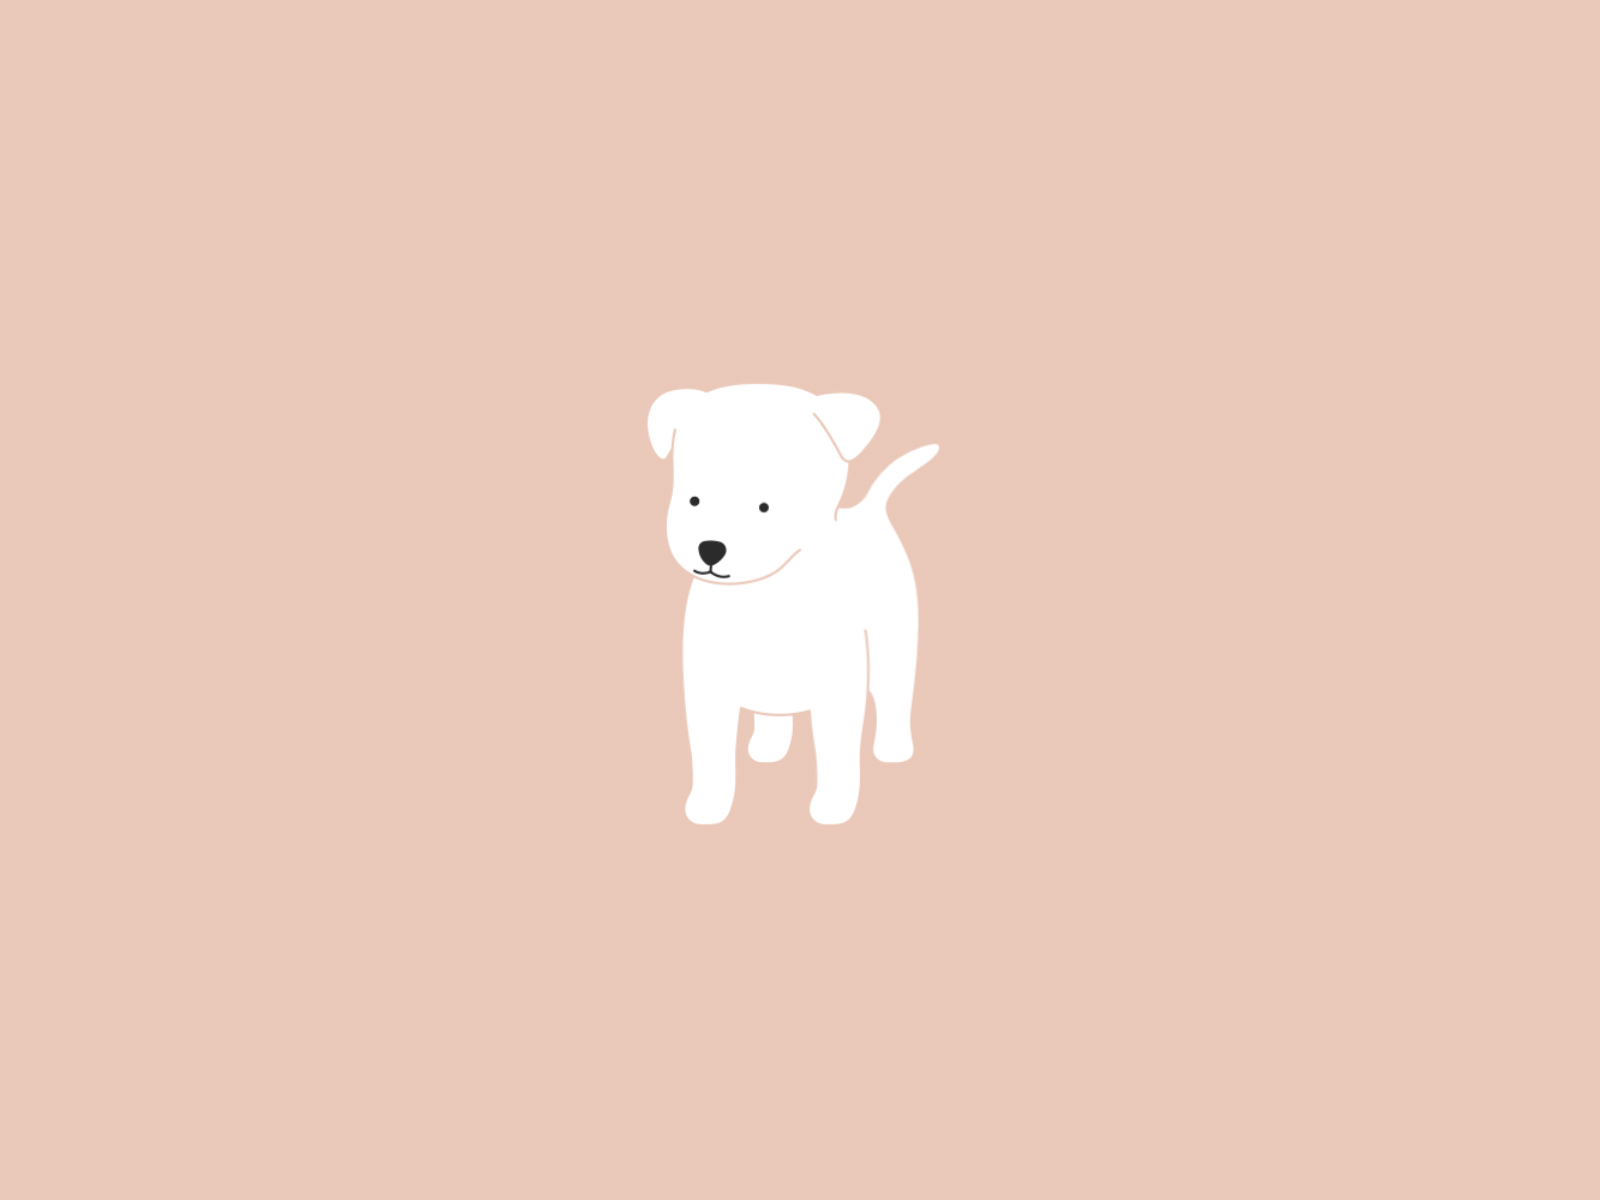 Share 81+ dog wallpaper gif - in.cdgdbentre